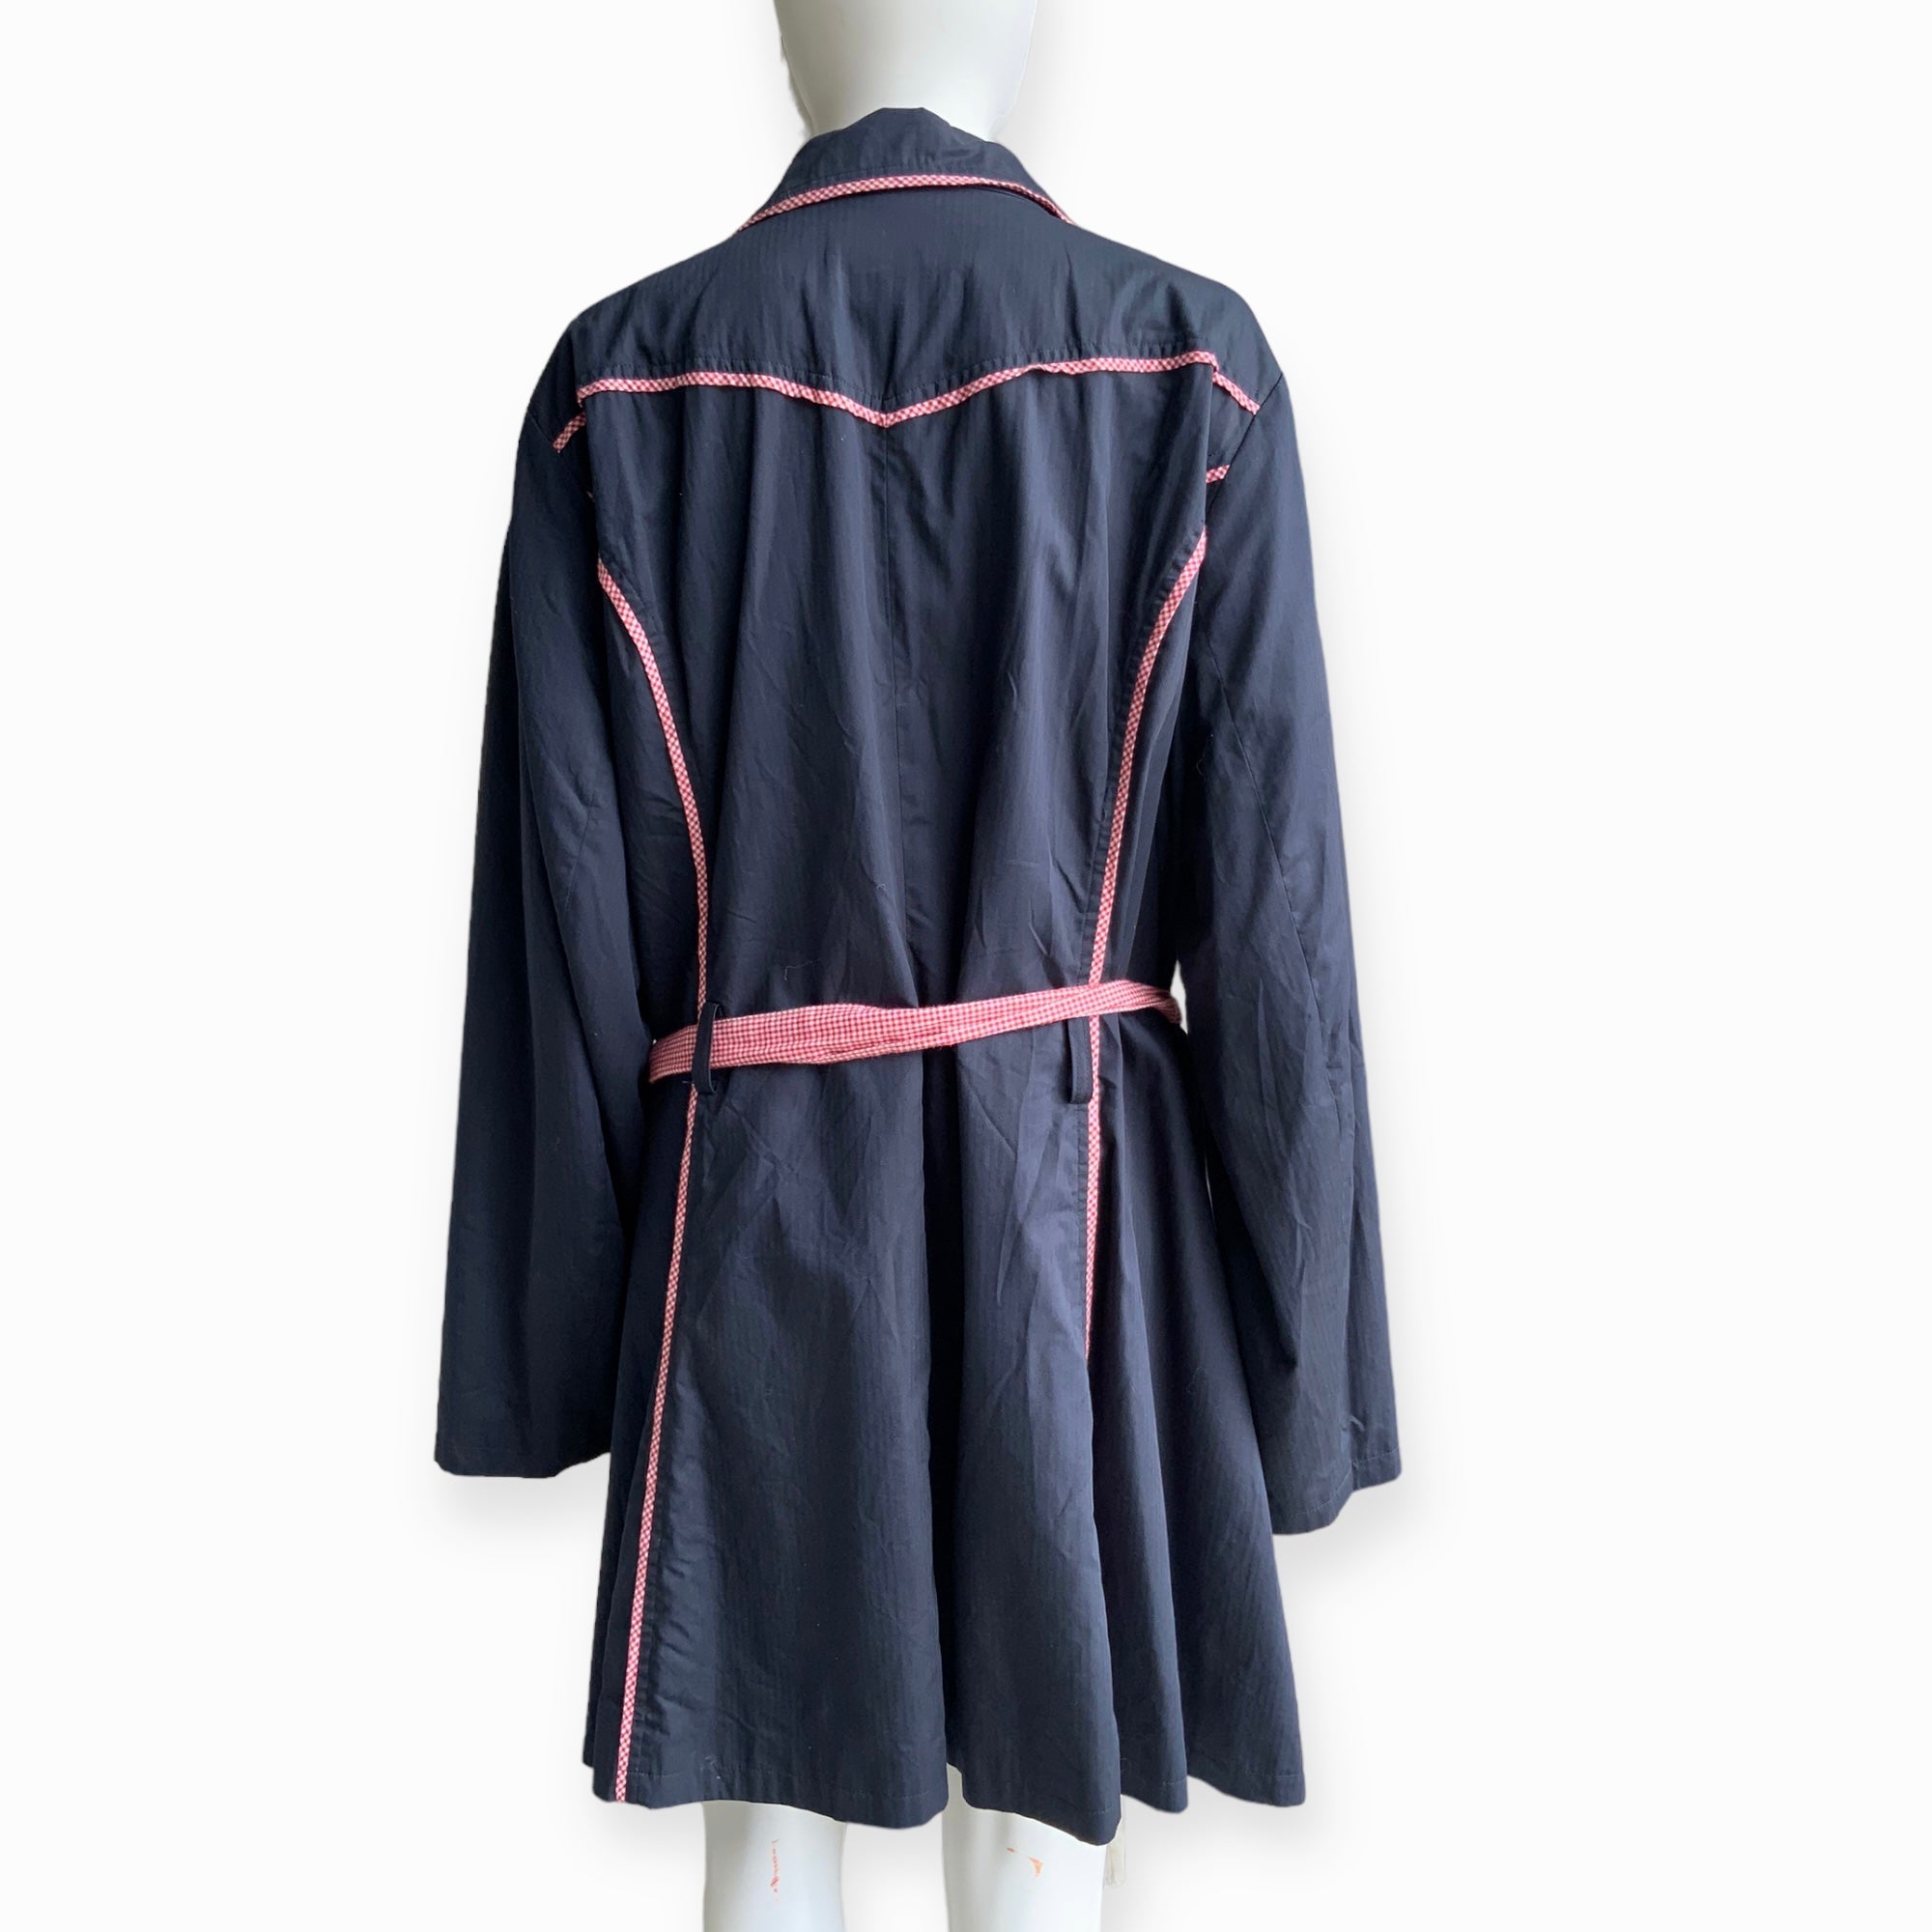 MODCLOTH East Coast Tour Navy Blue Trench Coat Jacket with Gingham Trim - Size 22